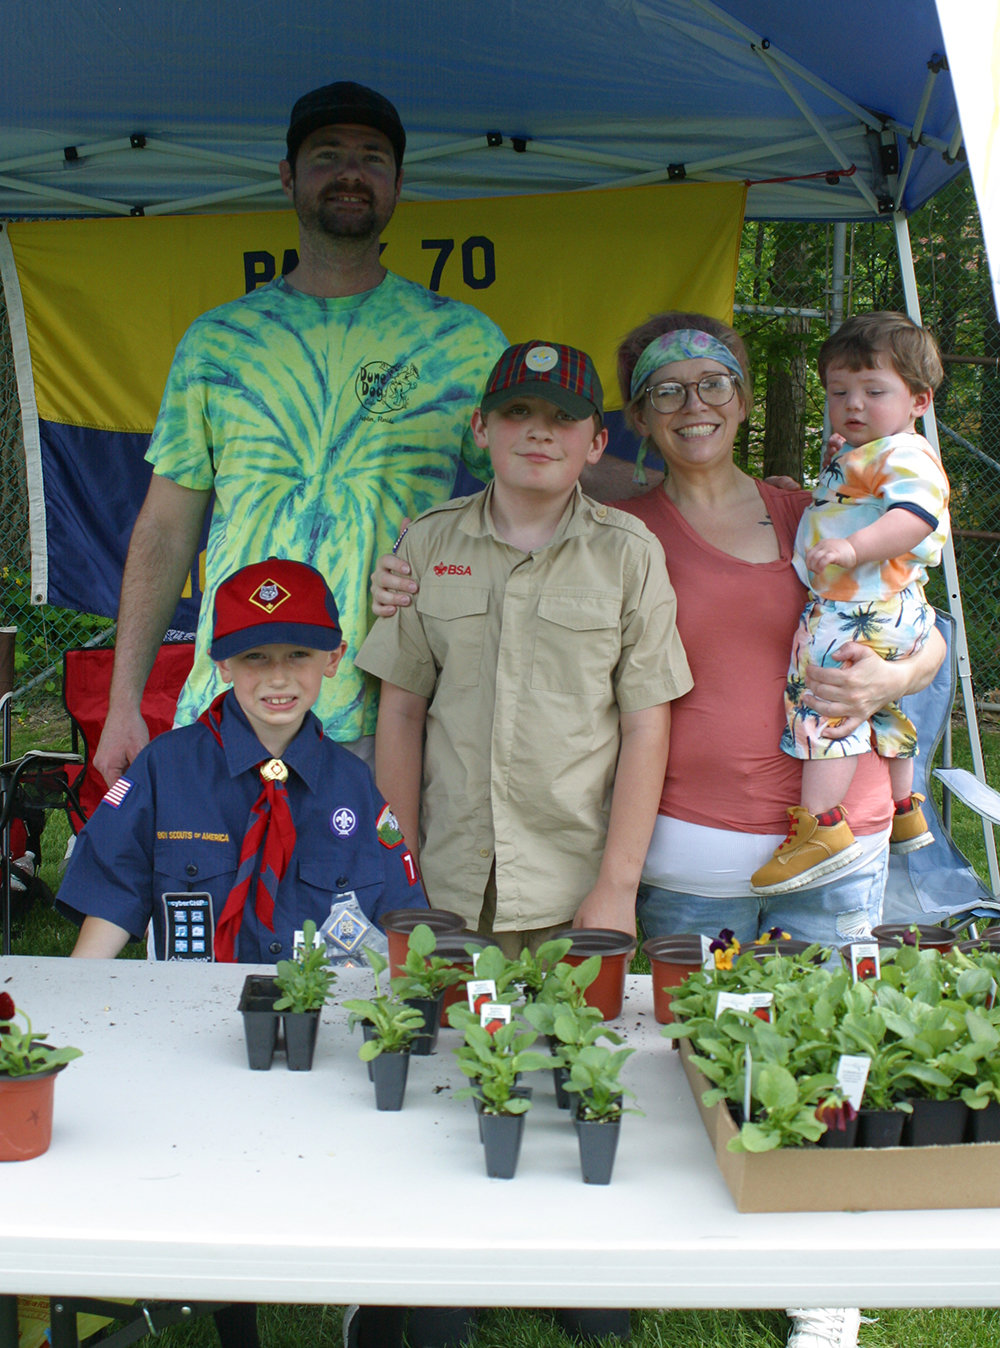 Cub pack 70 sold flowers. Pictured: Scouts Dayton Goslat and Liam Wells, along with Mike Wielins, Rachel Wilson and young Derek Wielins.